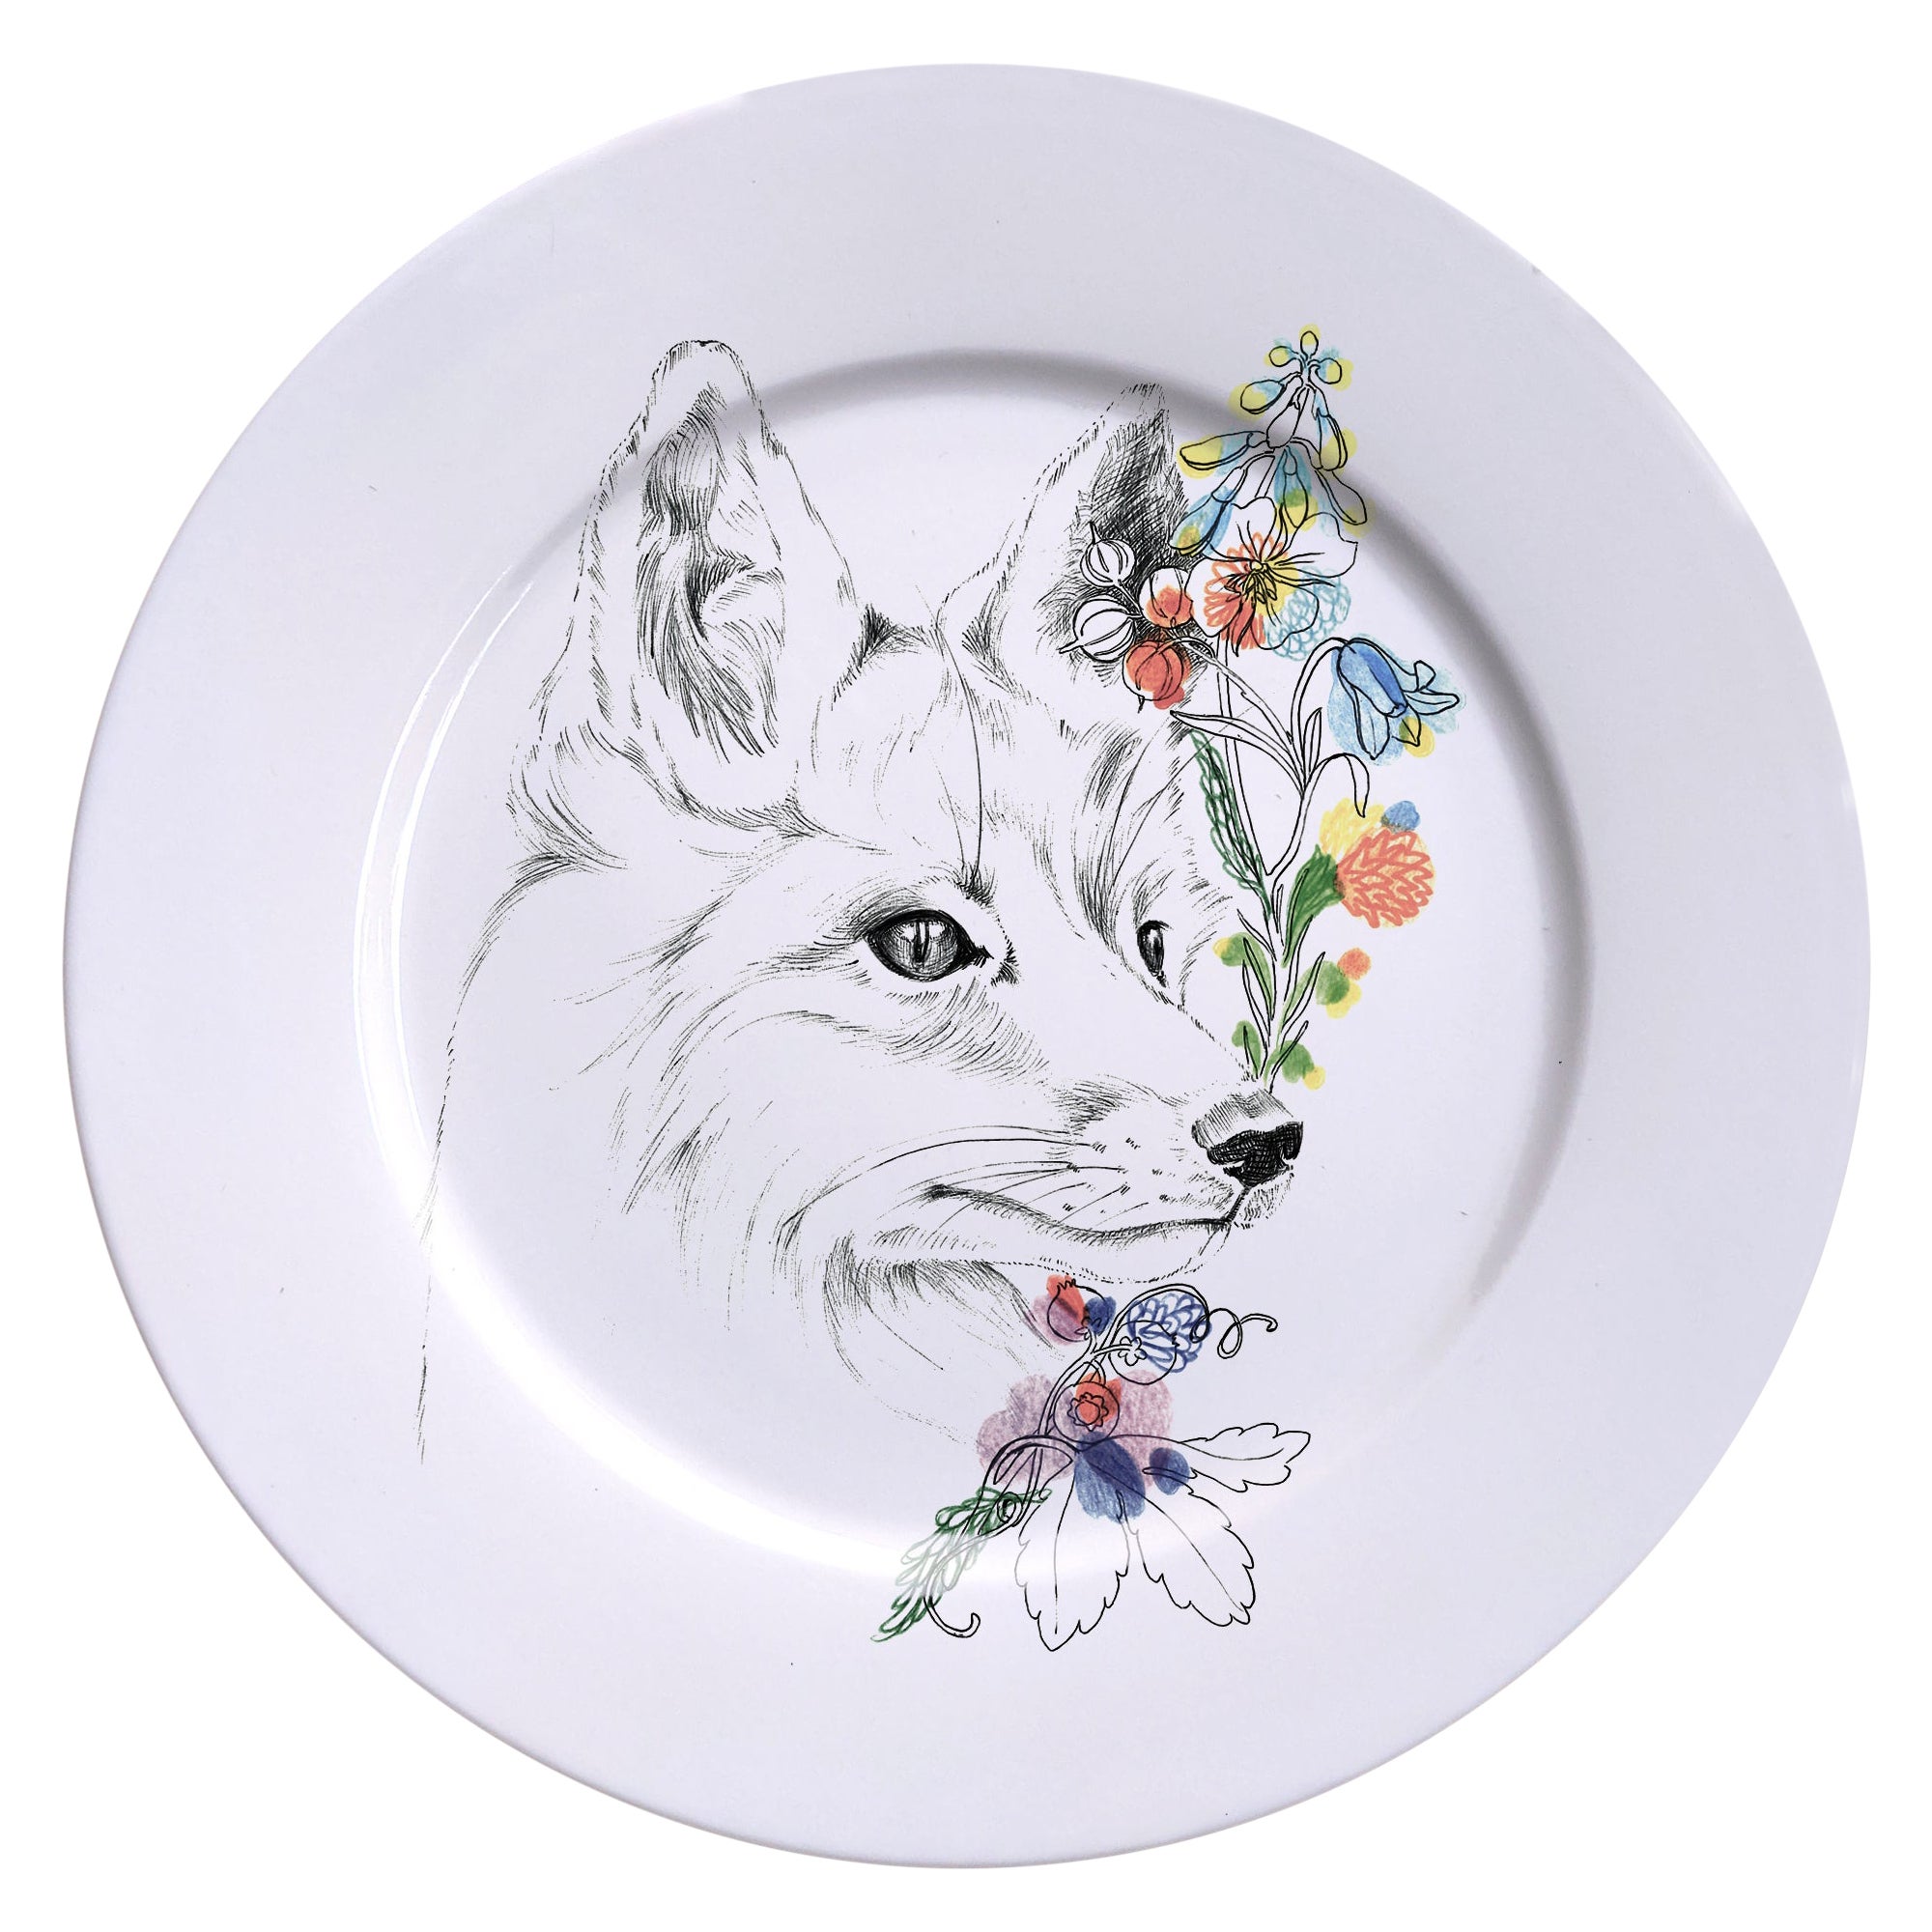 Ode to the Woods, Contemporary Porcelain Dinner Plate with Fox and Flowers